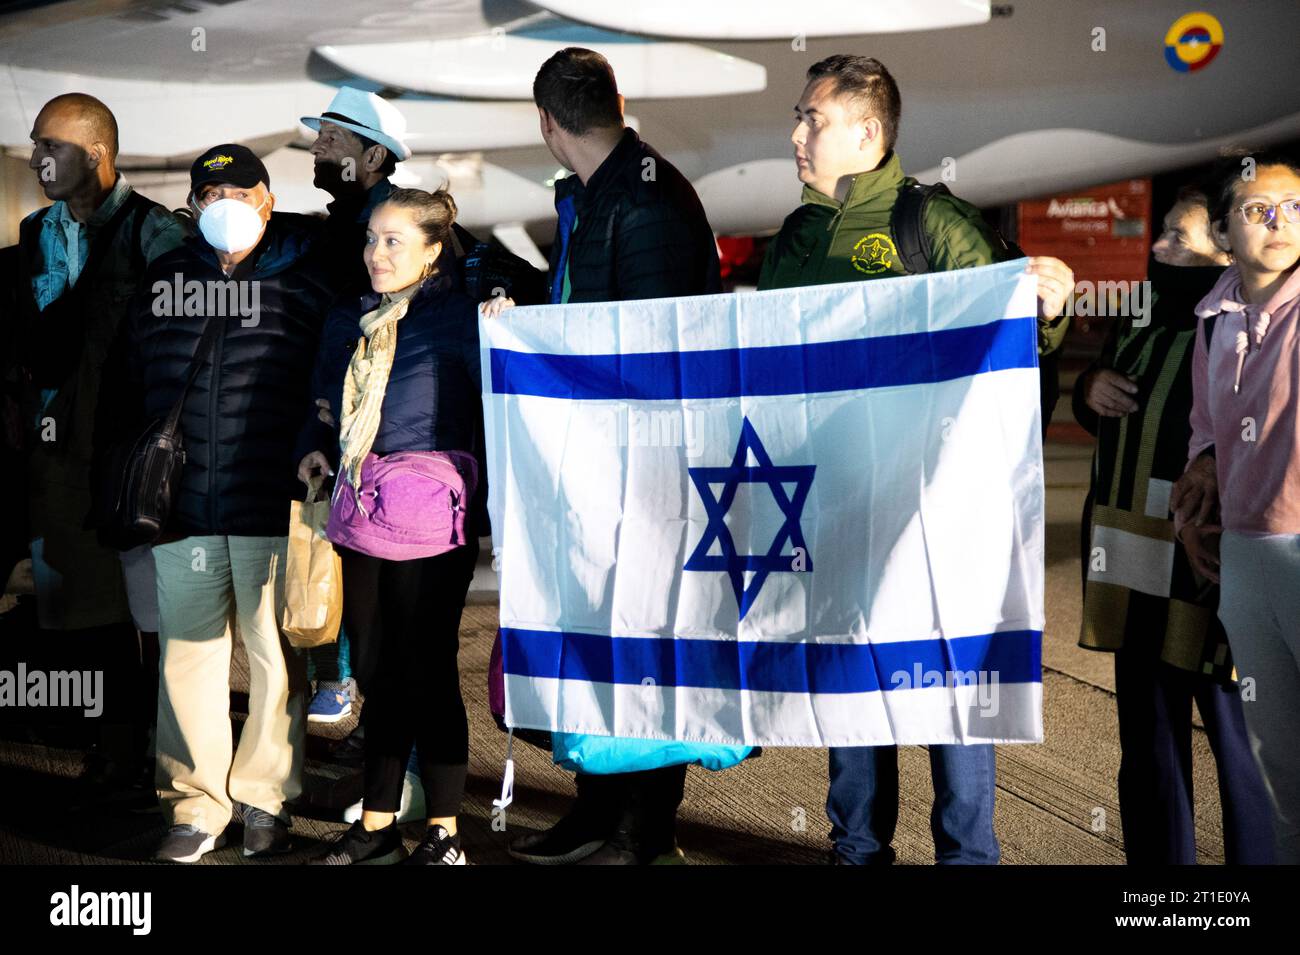 Colombians arrive in a Colombian Aerospacial force (Air Force) humanitarian flight from Tel Aviv, Israel after the Palestinian militant group Hamas ma Stock Photo